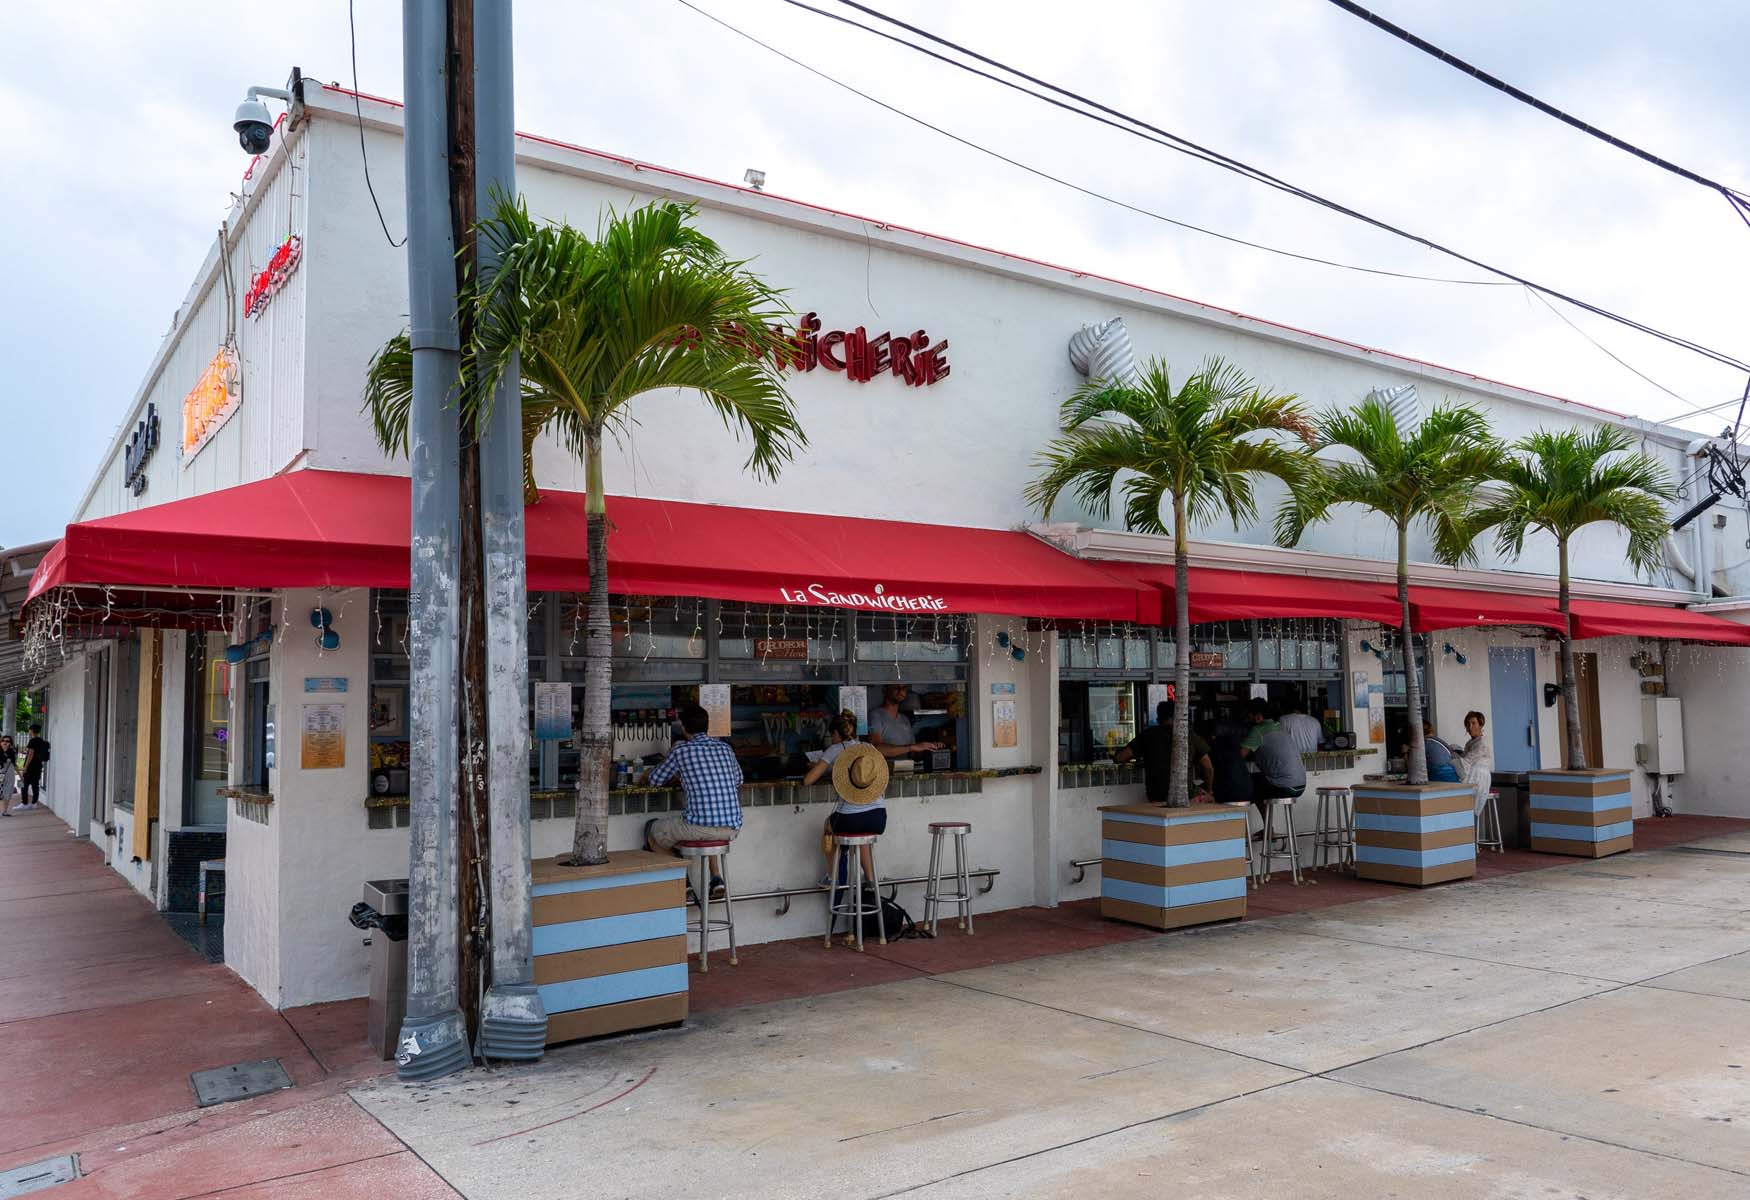 11-facts-about-famous-local-cuisine-in-miami-beach-florida